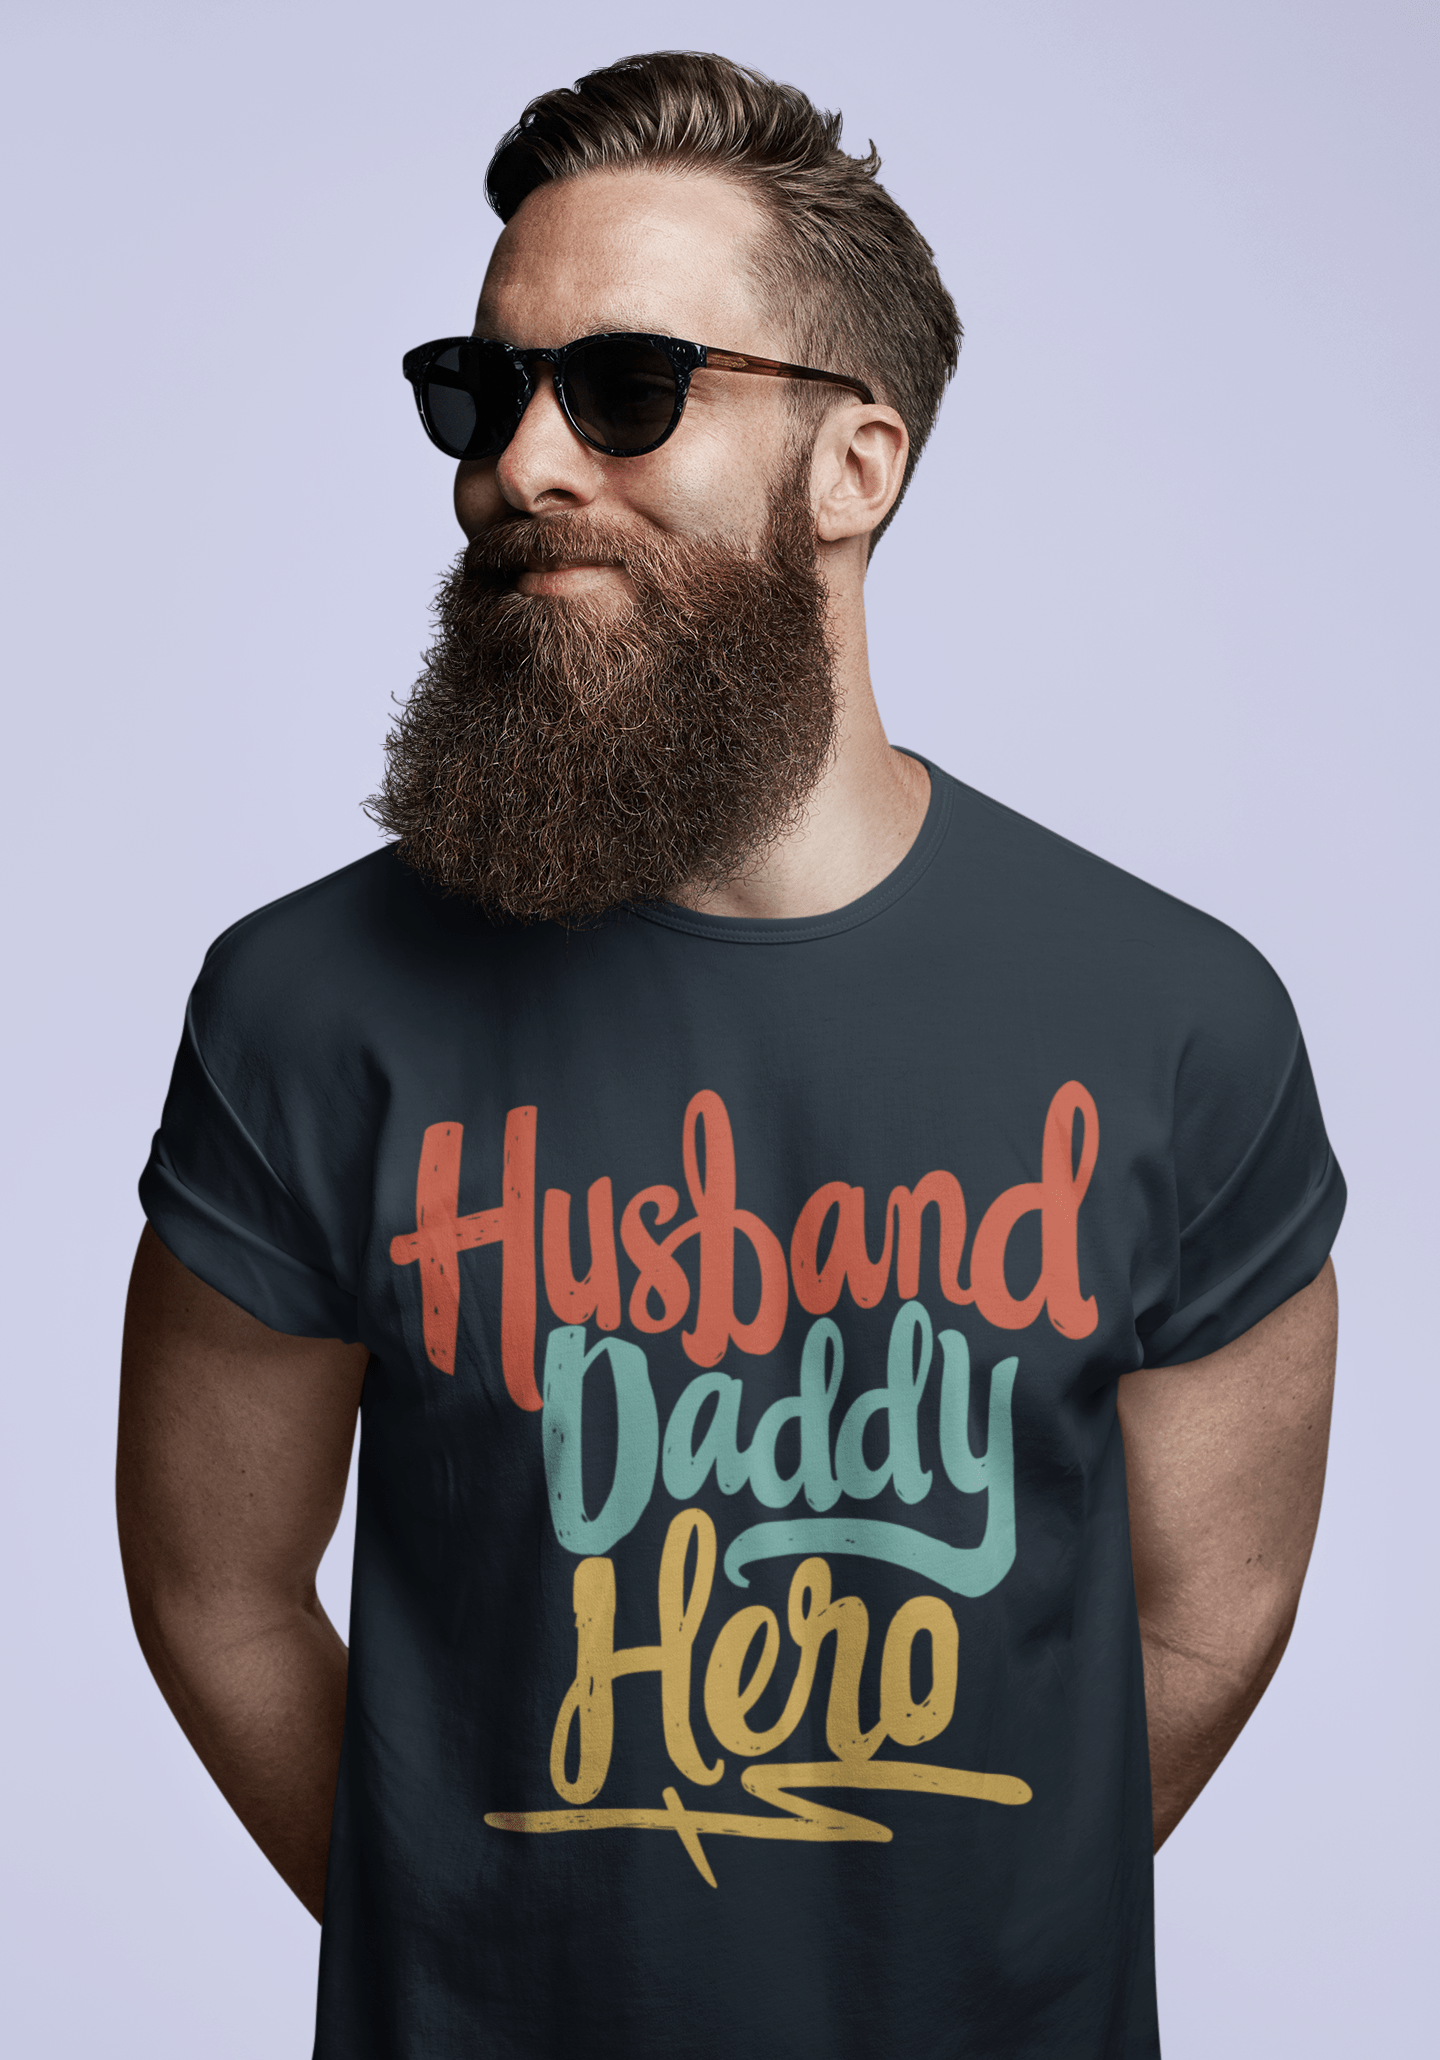 ULTRABASIC Men's T-Shirt Husband Daddy Hero Funny Father's Day Vintage Casual Gift